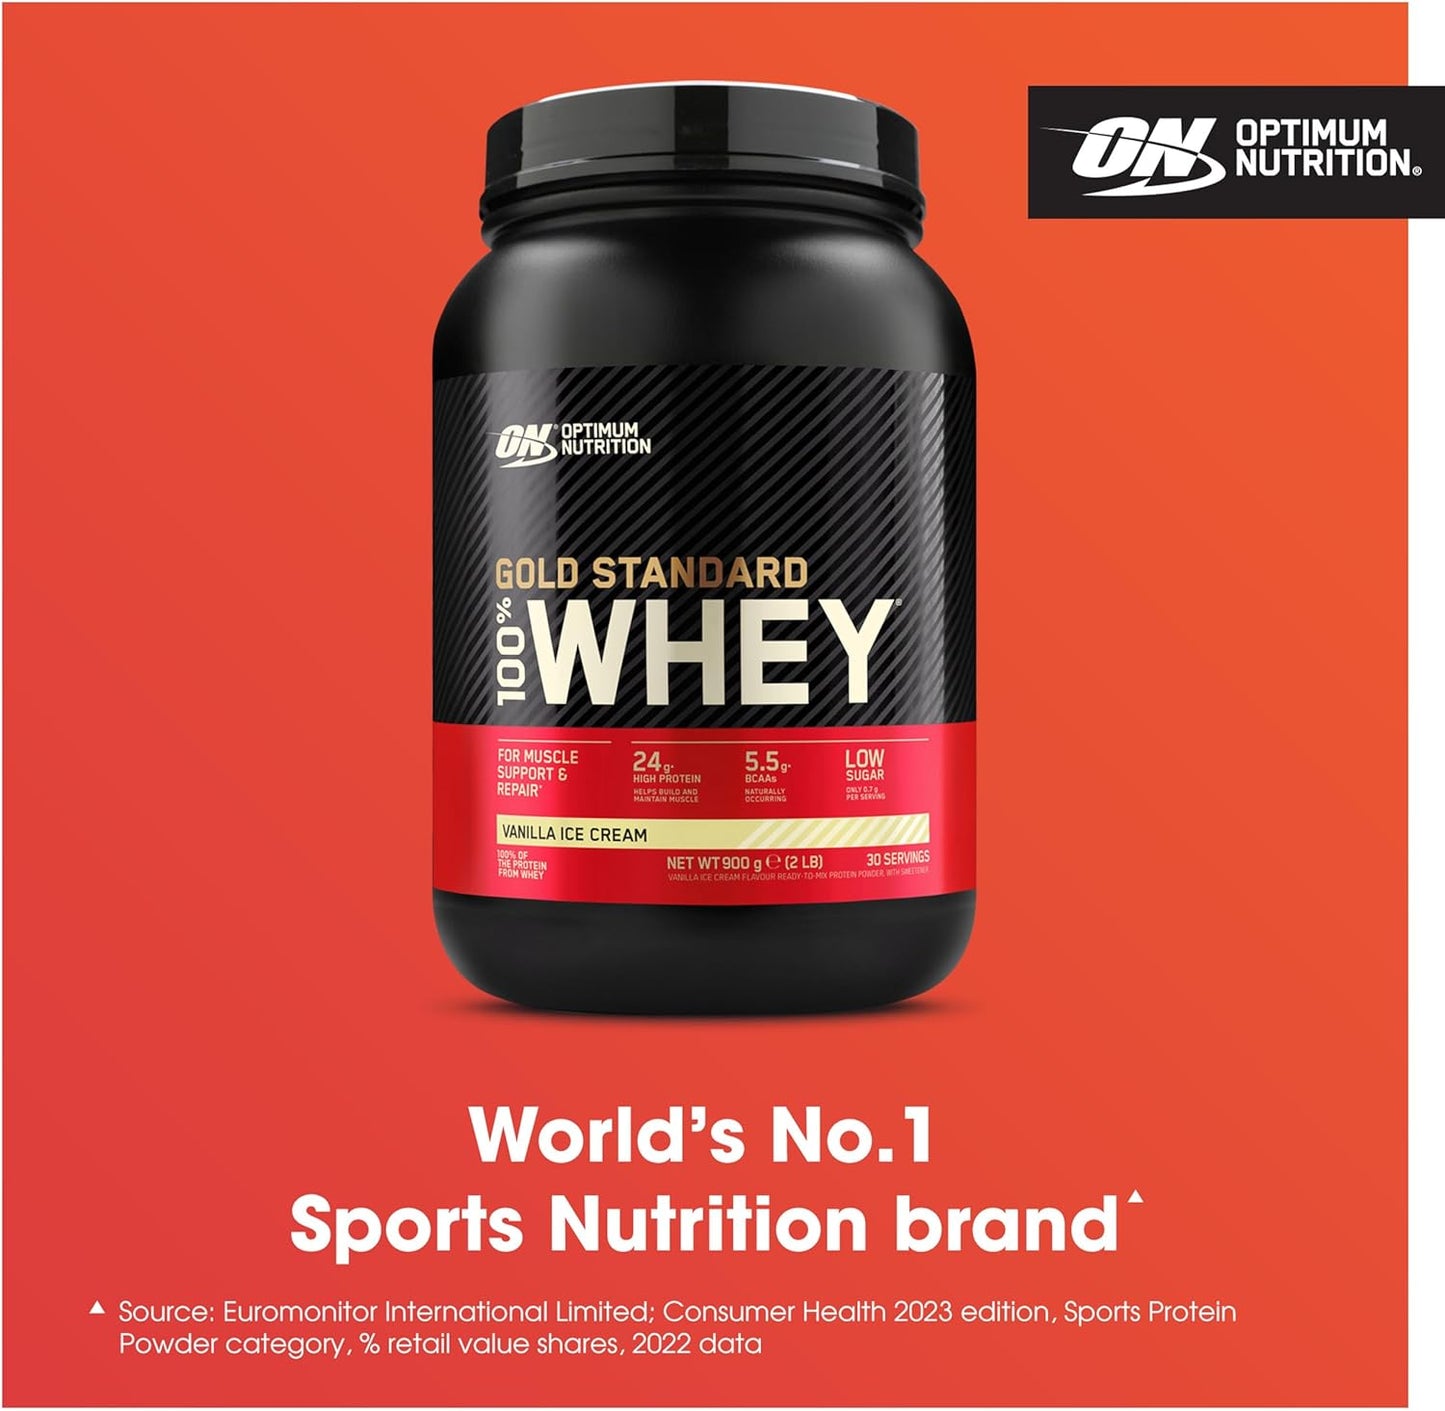 Gold Standard 100% Whey Muscle Building and Recovery Protein Powder with Naturally Occurring Glutamine and BCAA Amino Acids, Vanilla Ice Cream Flavour, 30 Servings, 900 G